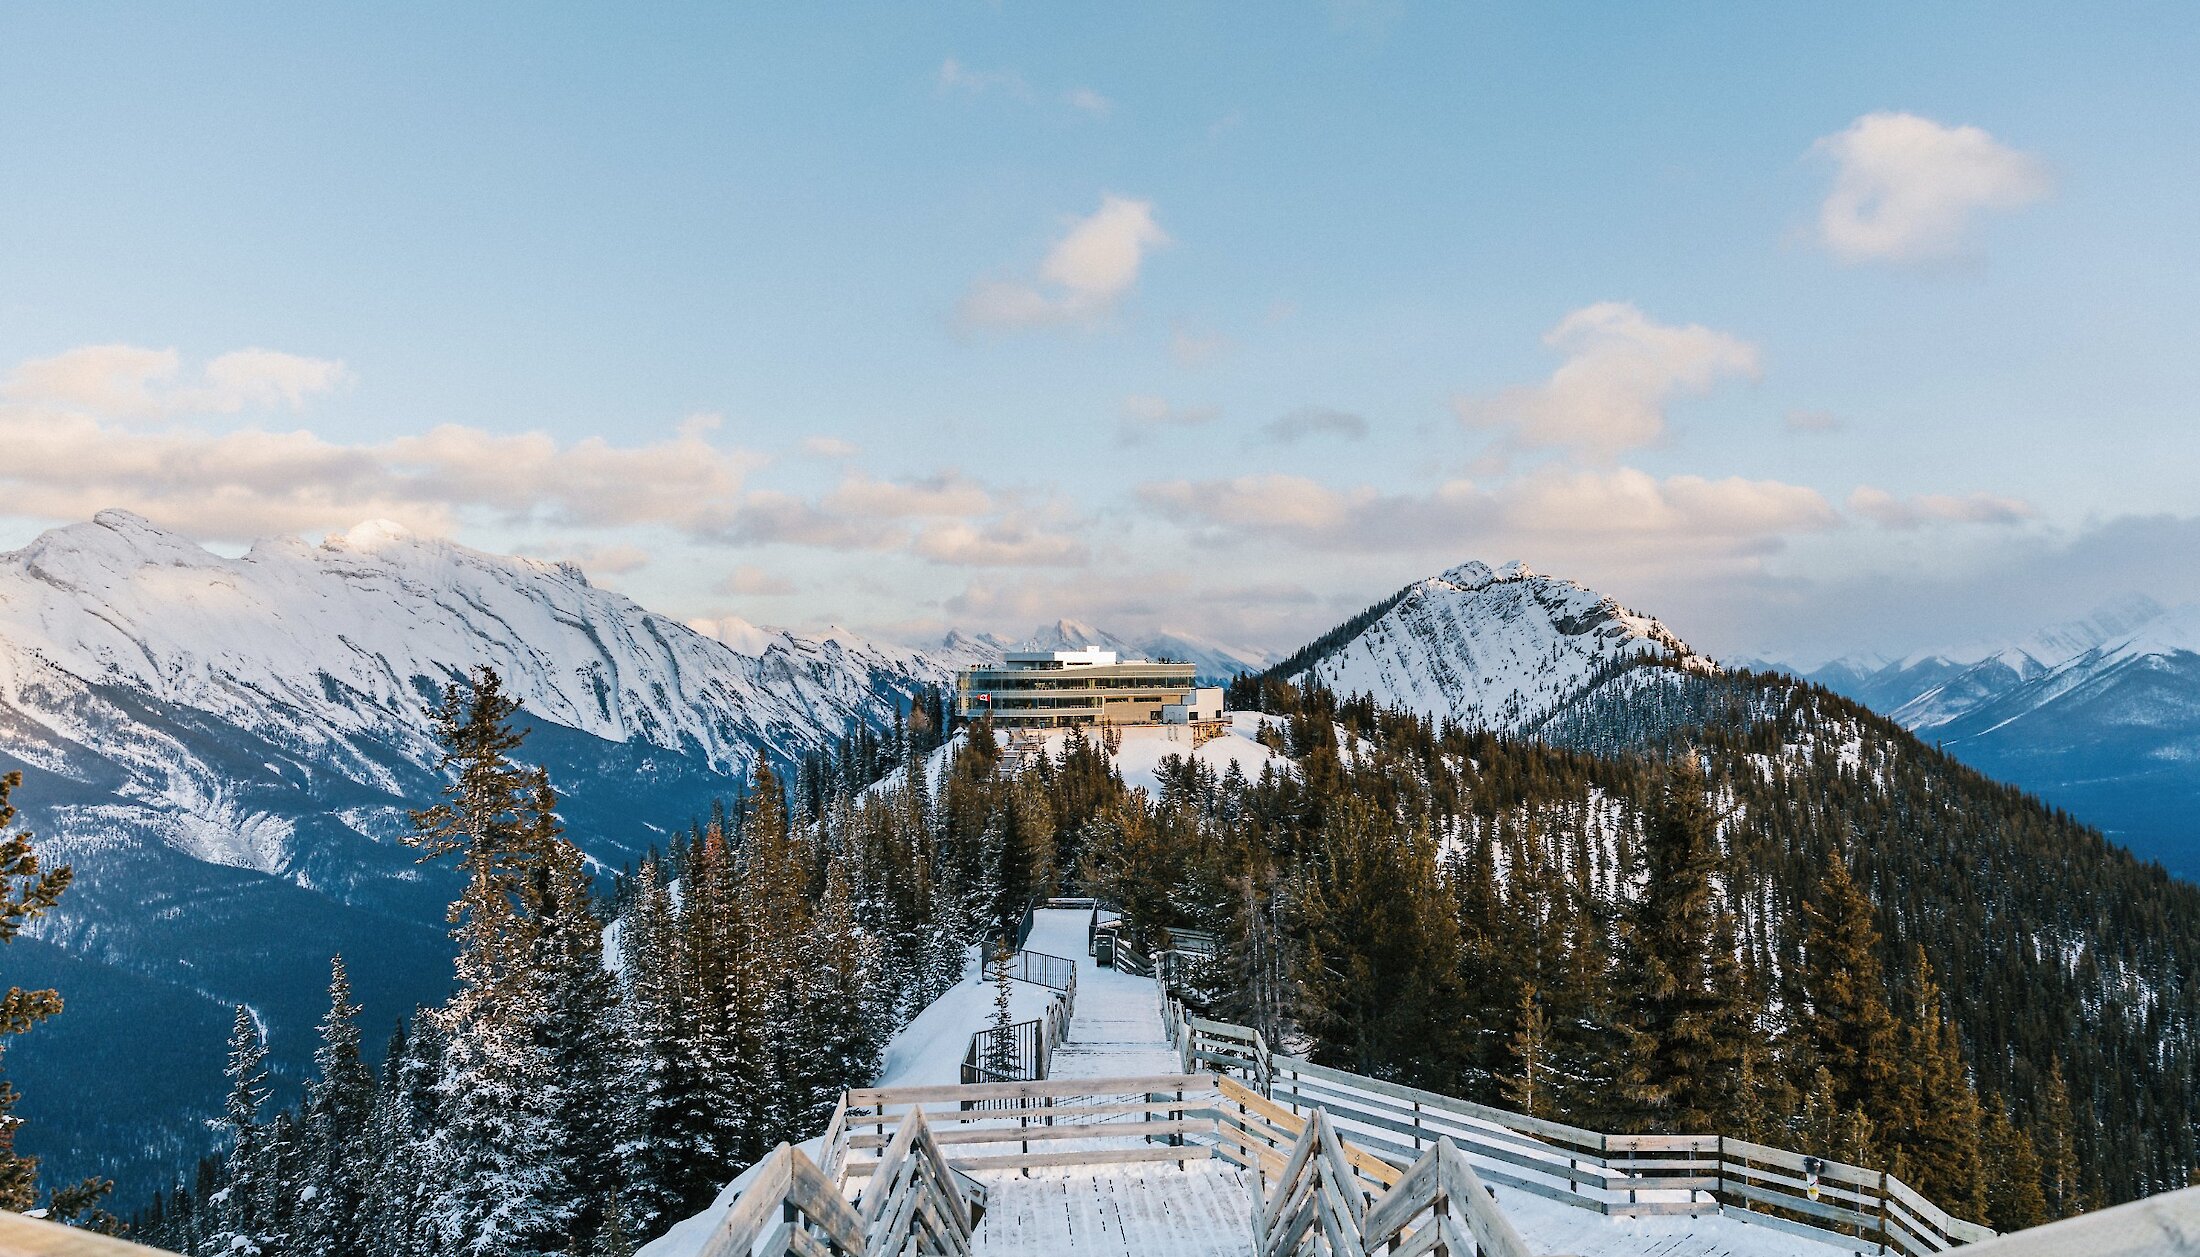 The boardwalk at the top of the Banff Gondola